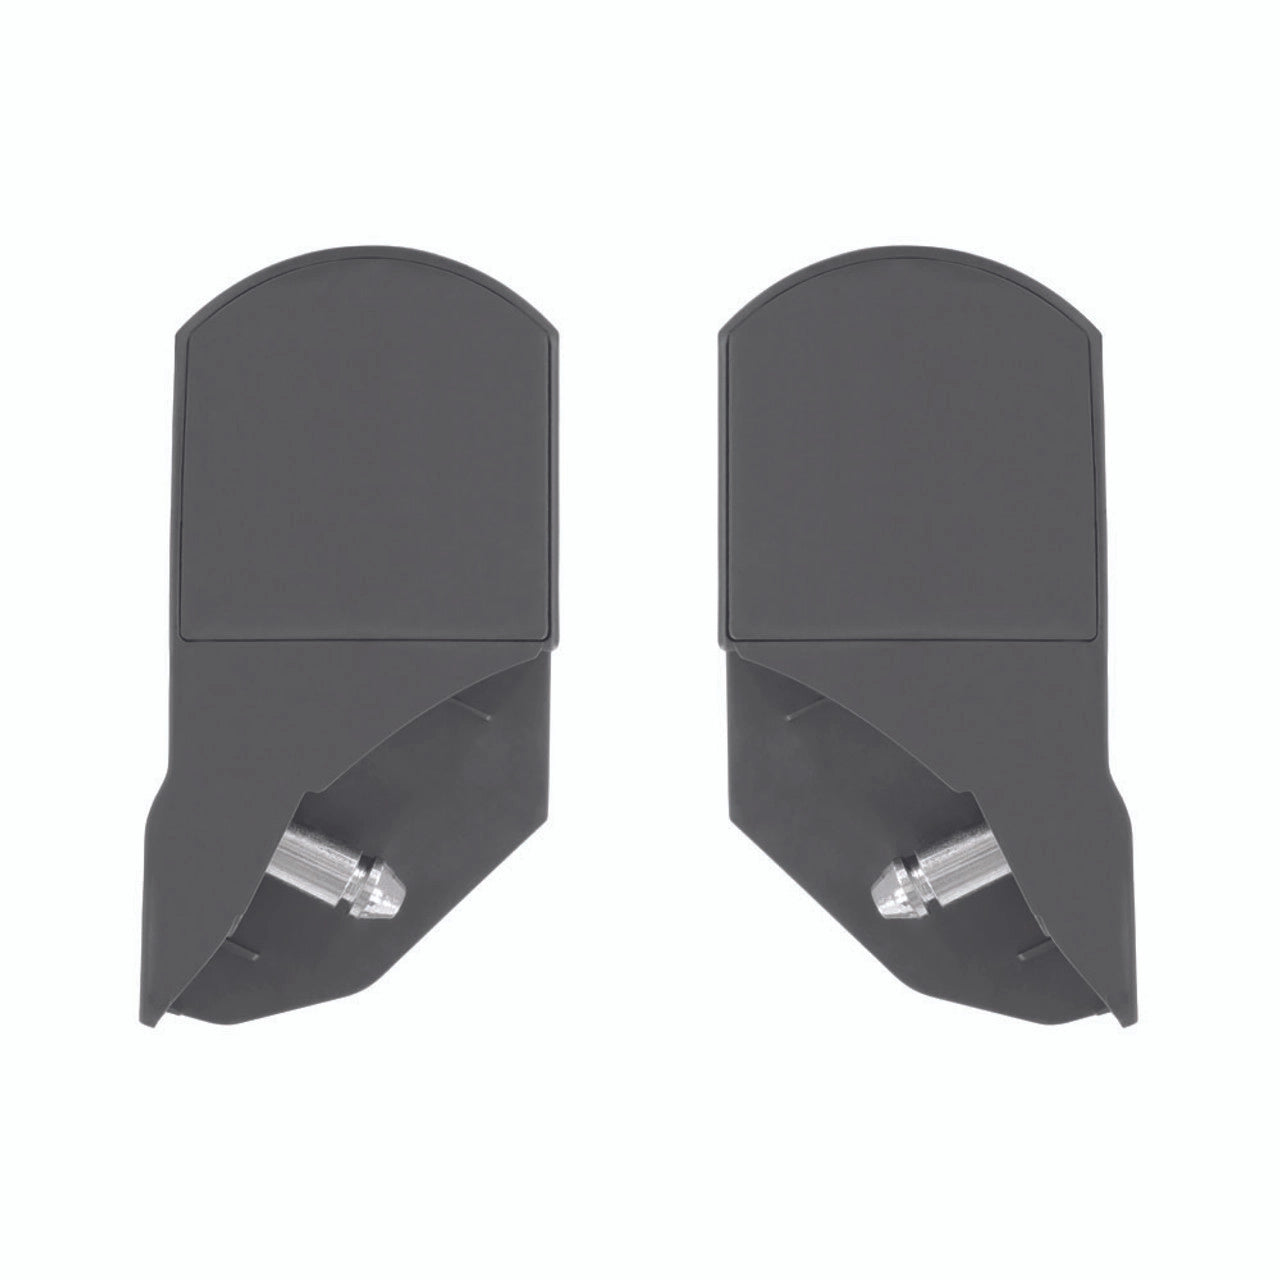 Babystyle Oyster Zero Carrycot Adaptors For Oyster 3 Carrycot